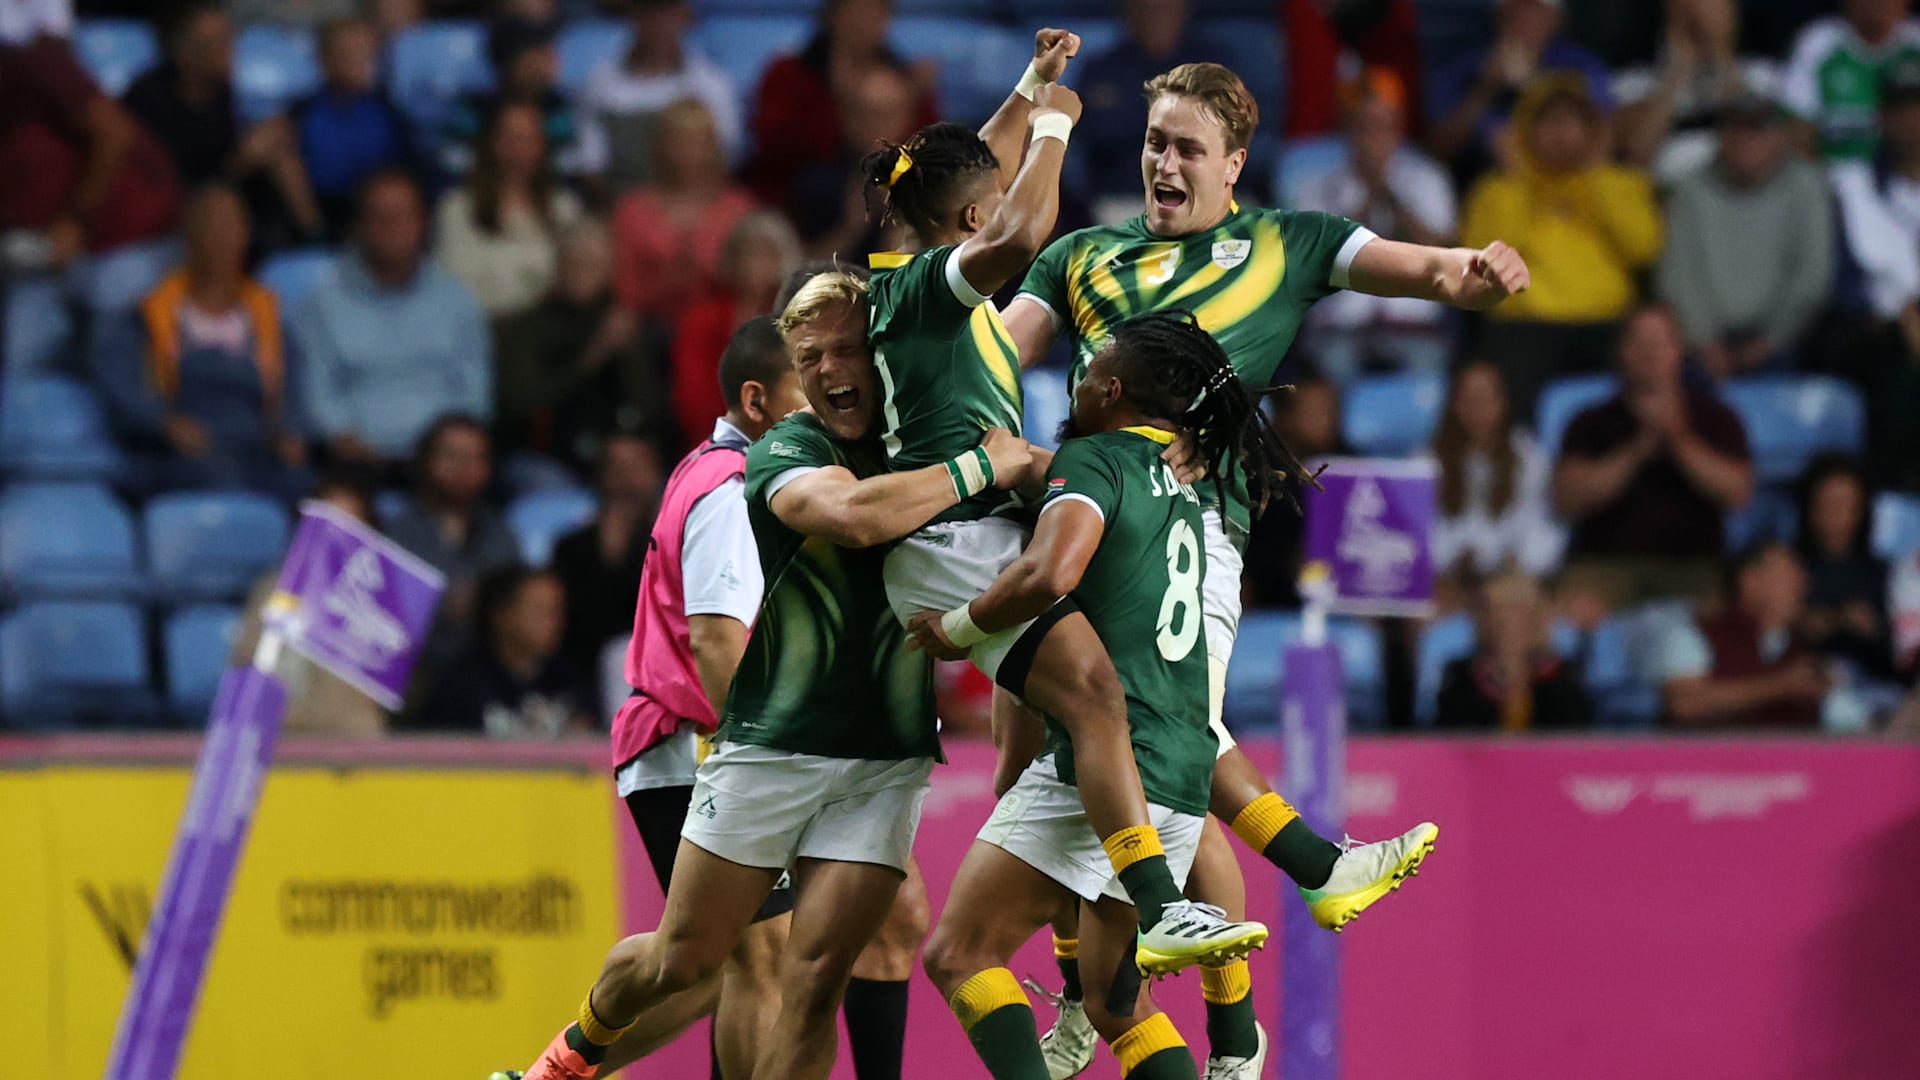 Rugby 7s World Cup 2022 preview, teams, schedule, where is it held?